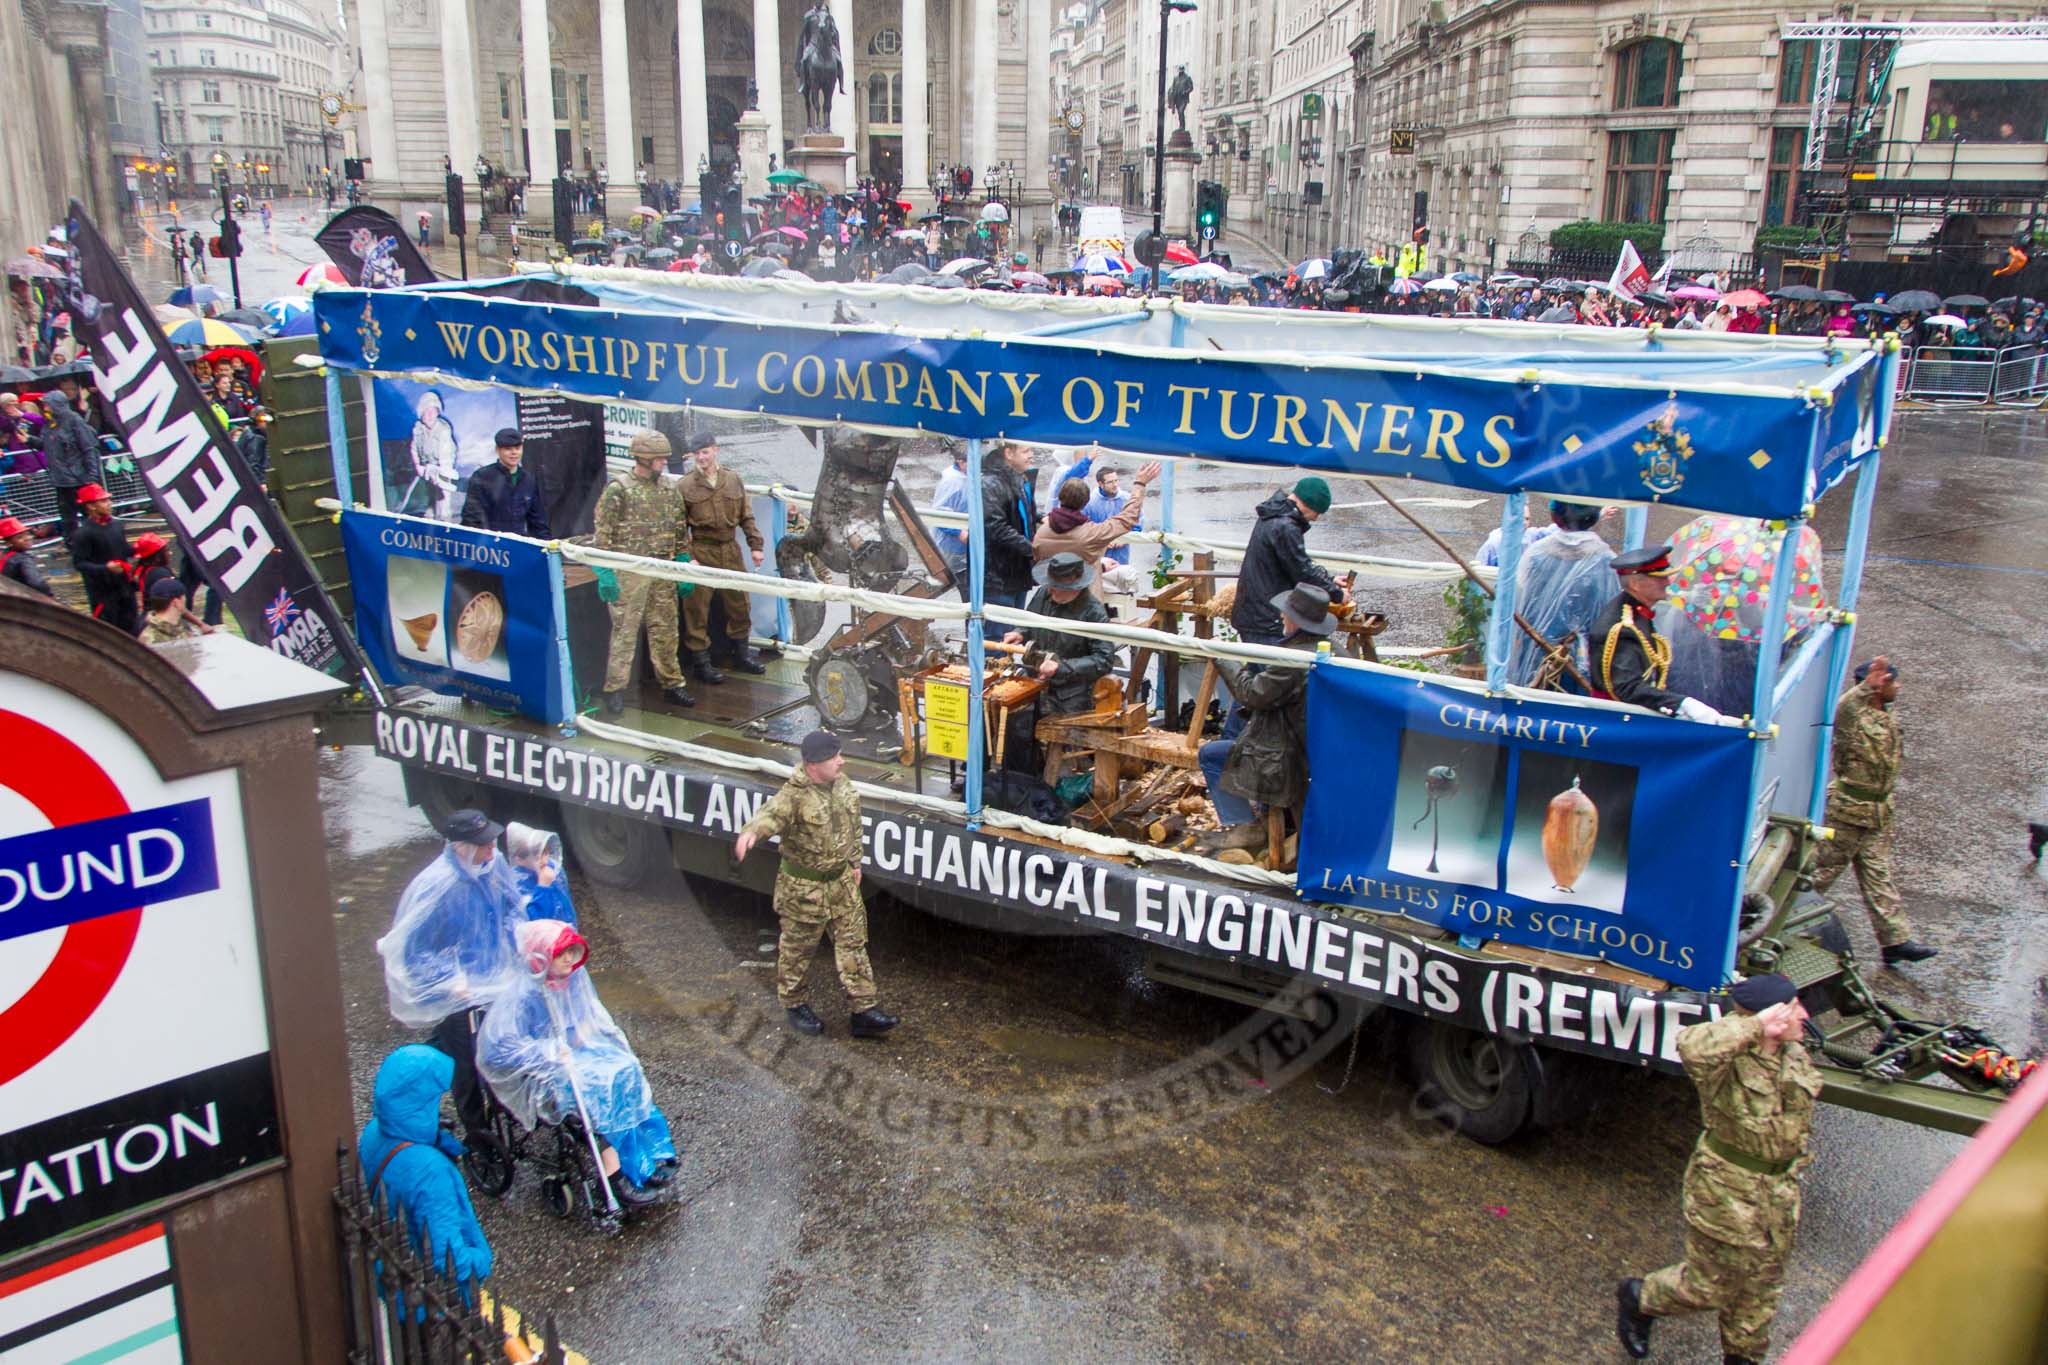 Lord Mayor's Show 2013: 51-Workshipful Company of Turners- recived Royal Charter in 1604. Its prime objective is to promote the craft of turning..
Press stand opposite Mansion House, City of London,
London,
Greater London,
United Kingdom,
on 09 November 2013 at 11:29, image #674